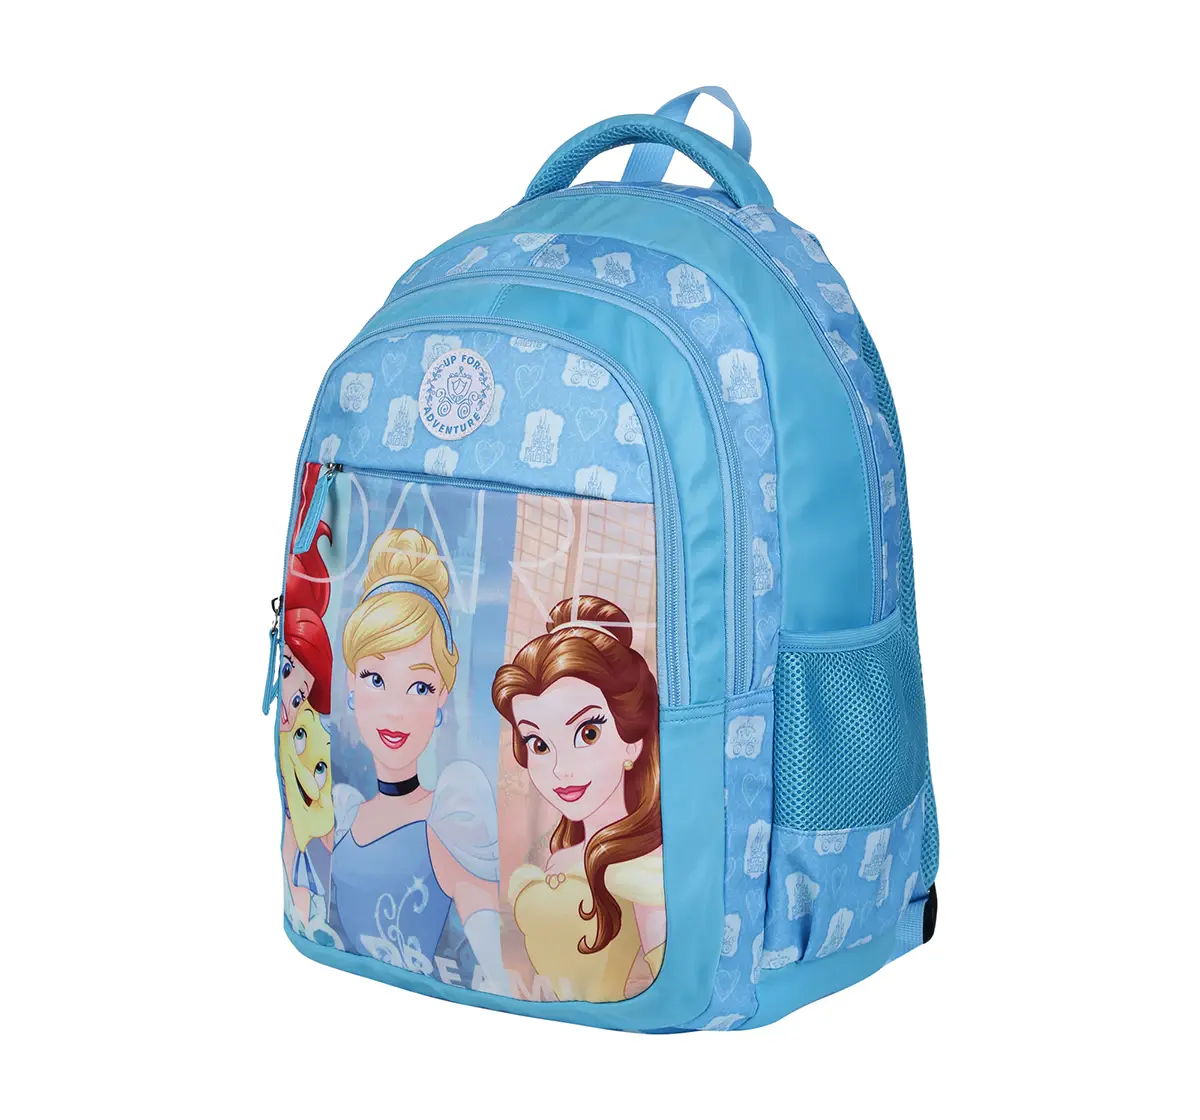 Disney Princess Adventure Blue 15" Backpack Bags for age 3Y+ 